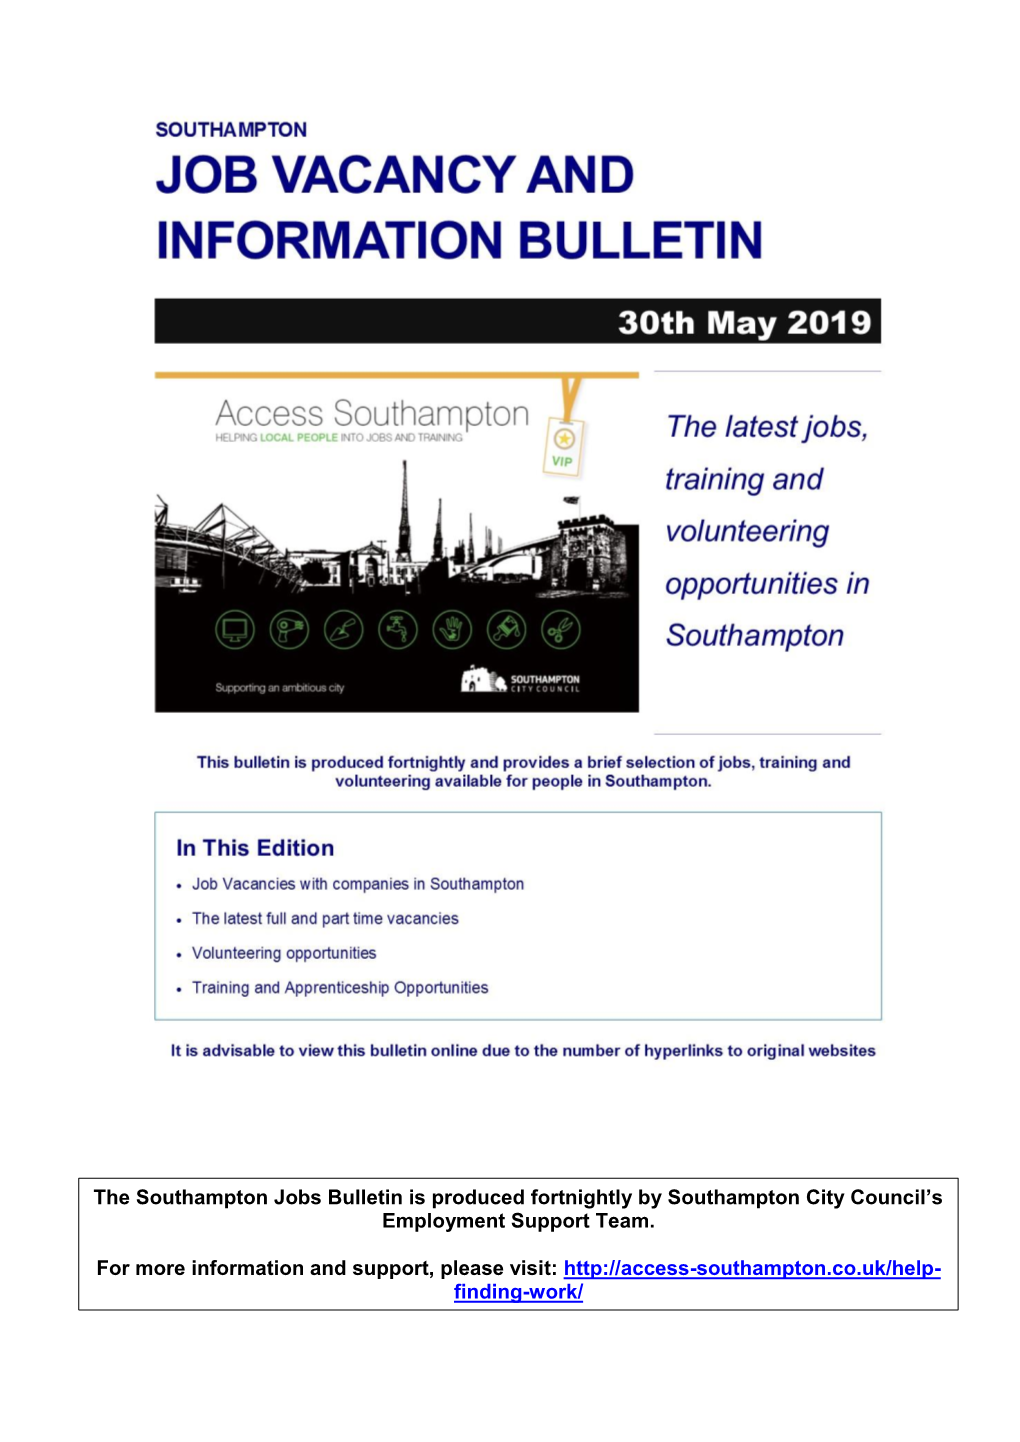 The Southampton Jobs Bulletin Is Produced Fortnightly by Southampton City Council’S Employment Support Team